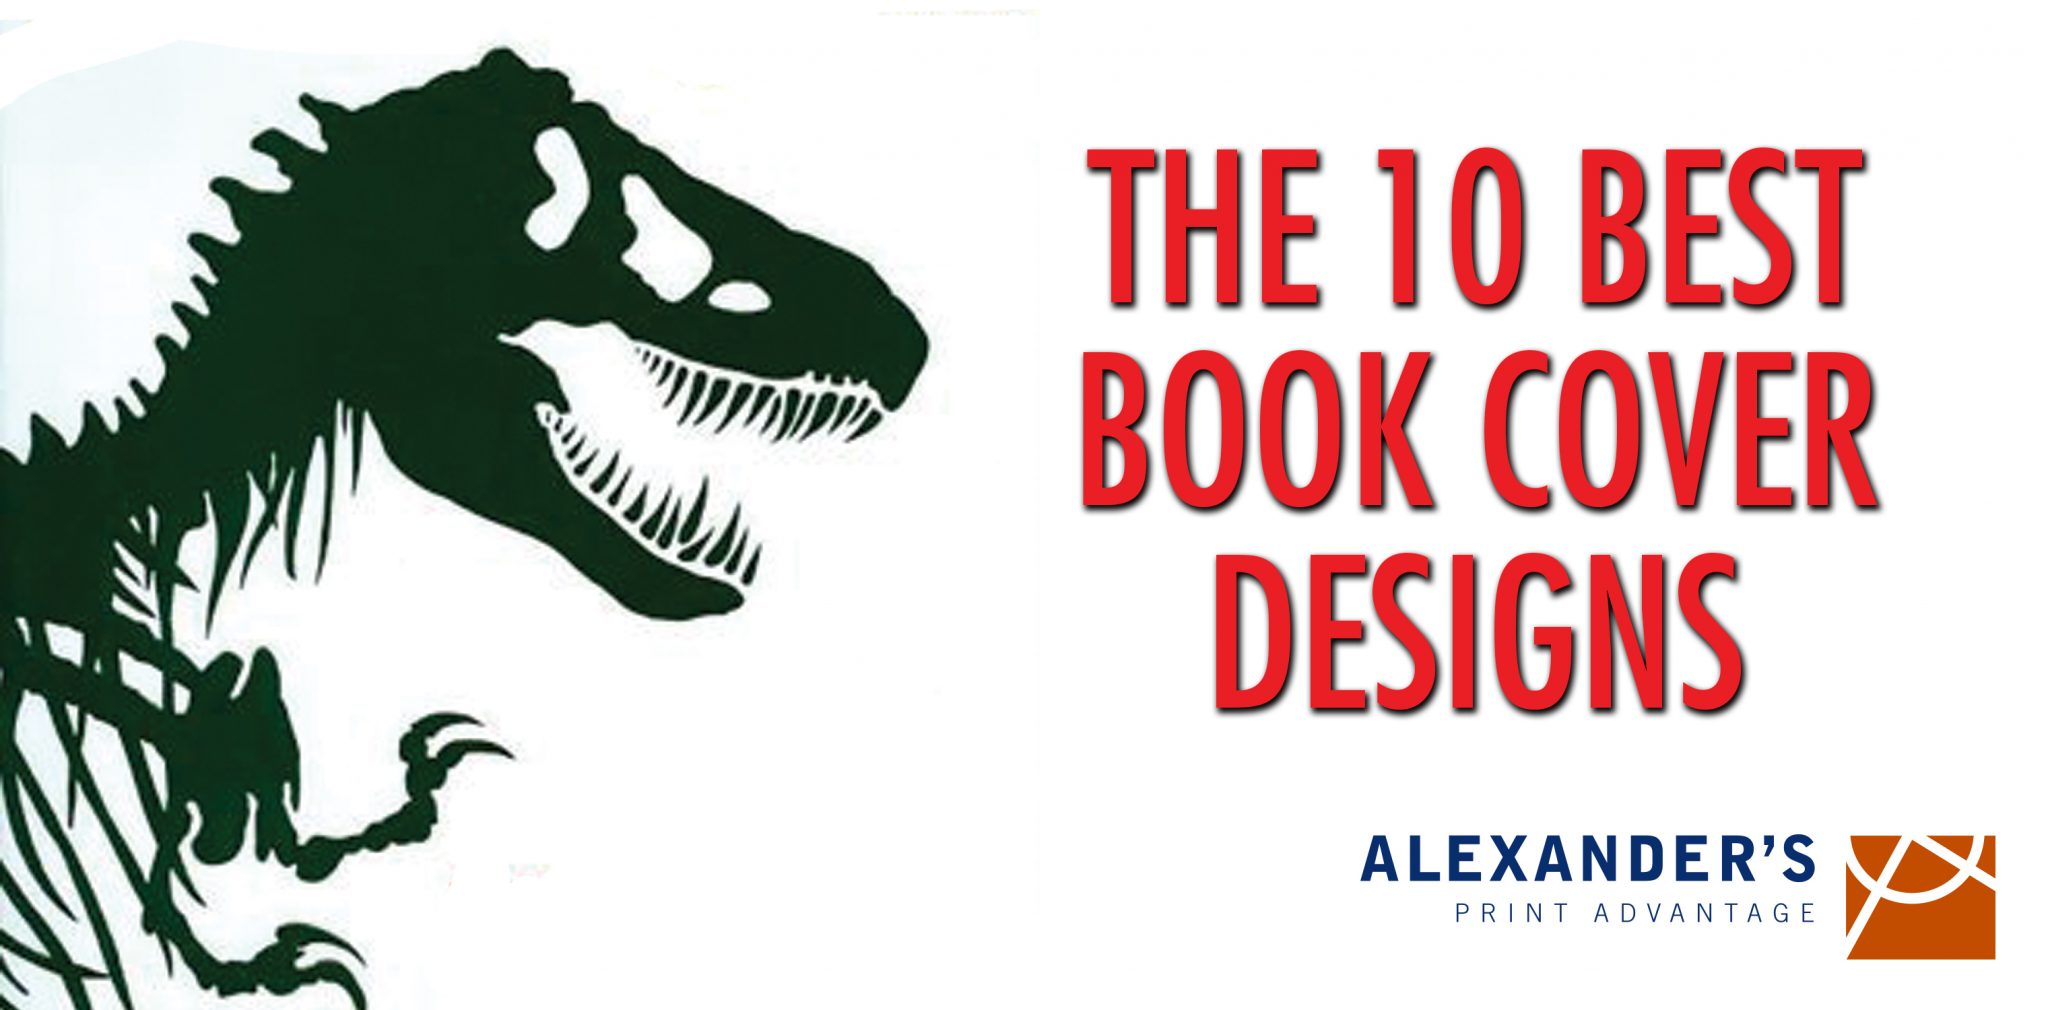 The 10 Best Book Cover Designs